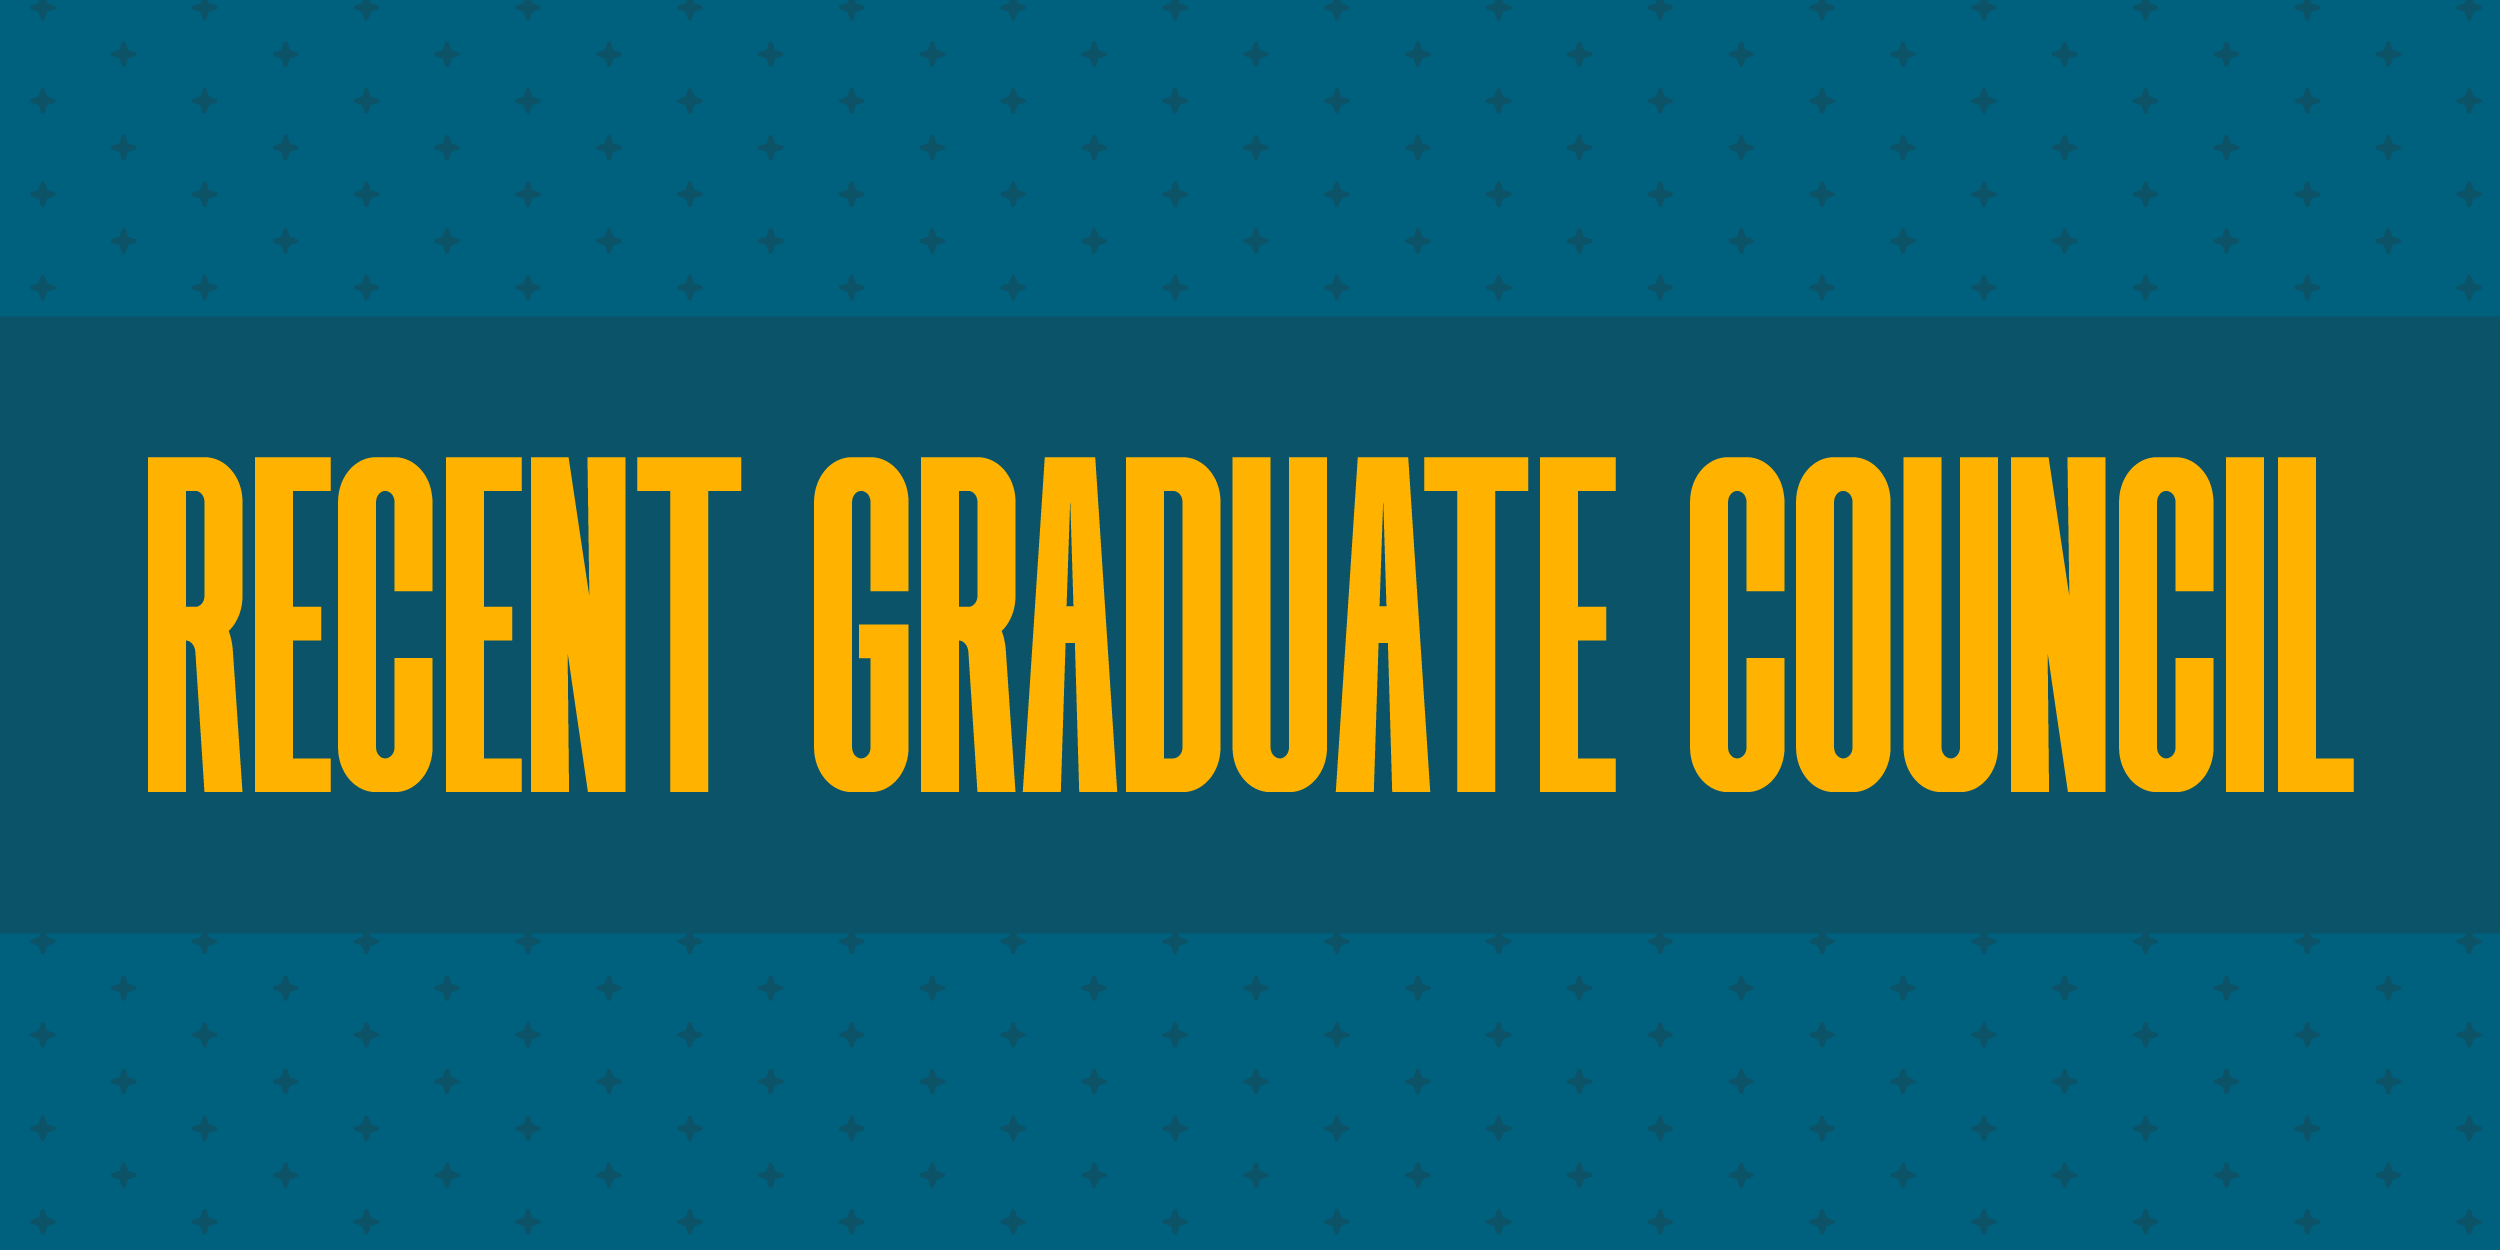 Recent Graduate Council in yellow text on a blue background